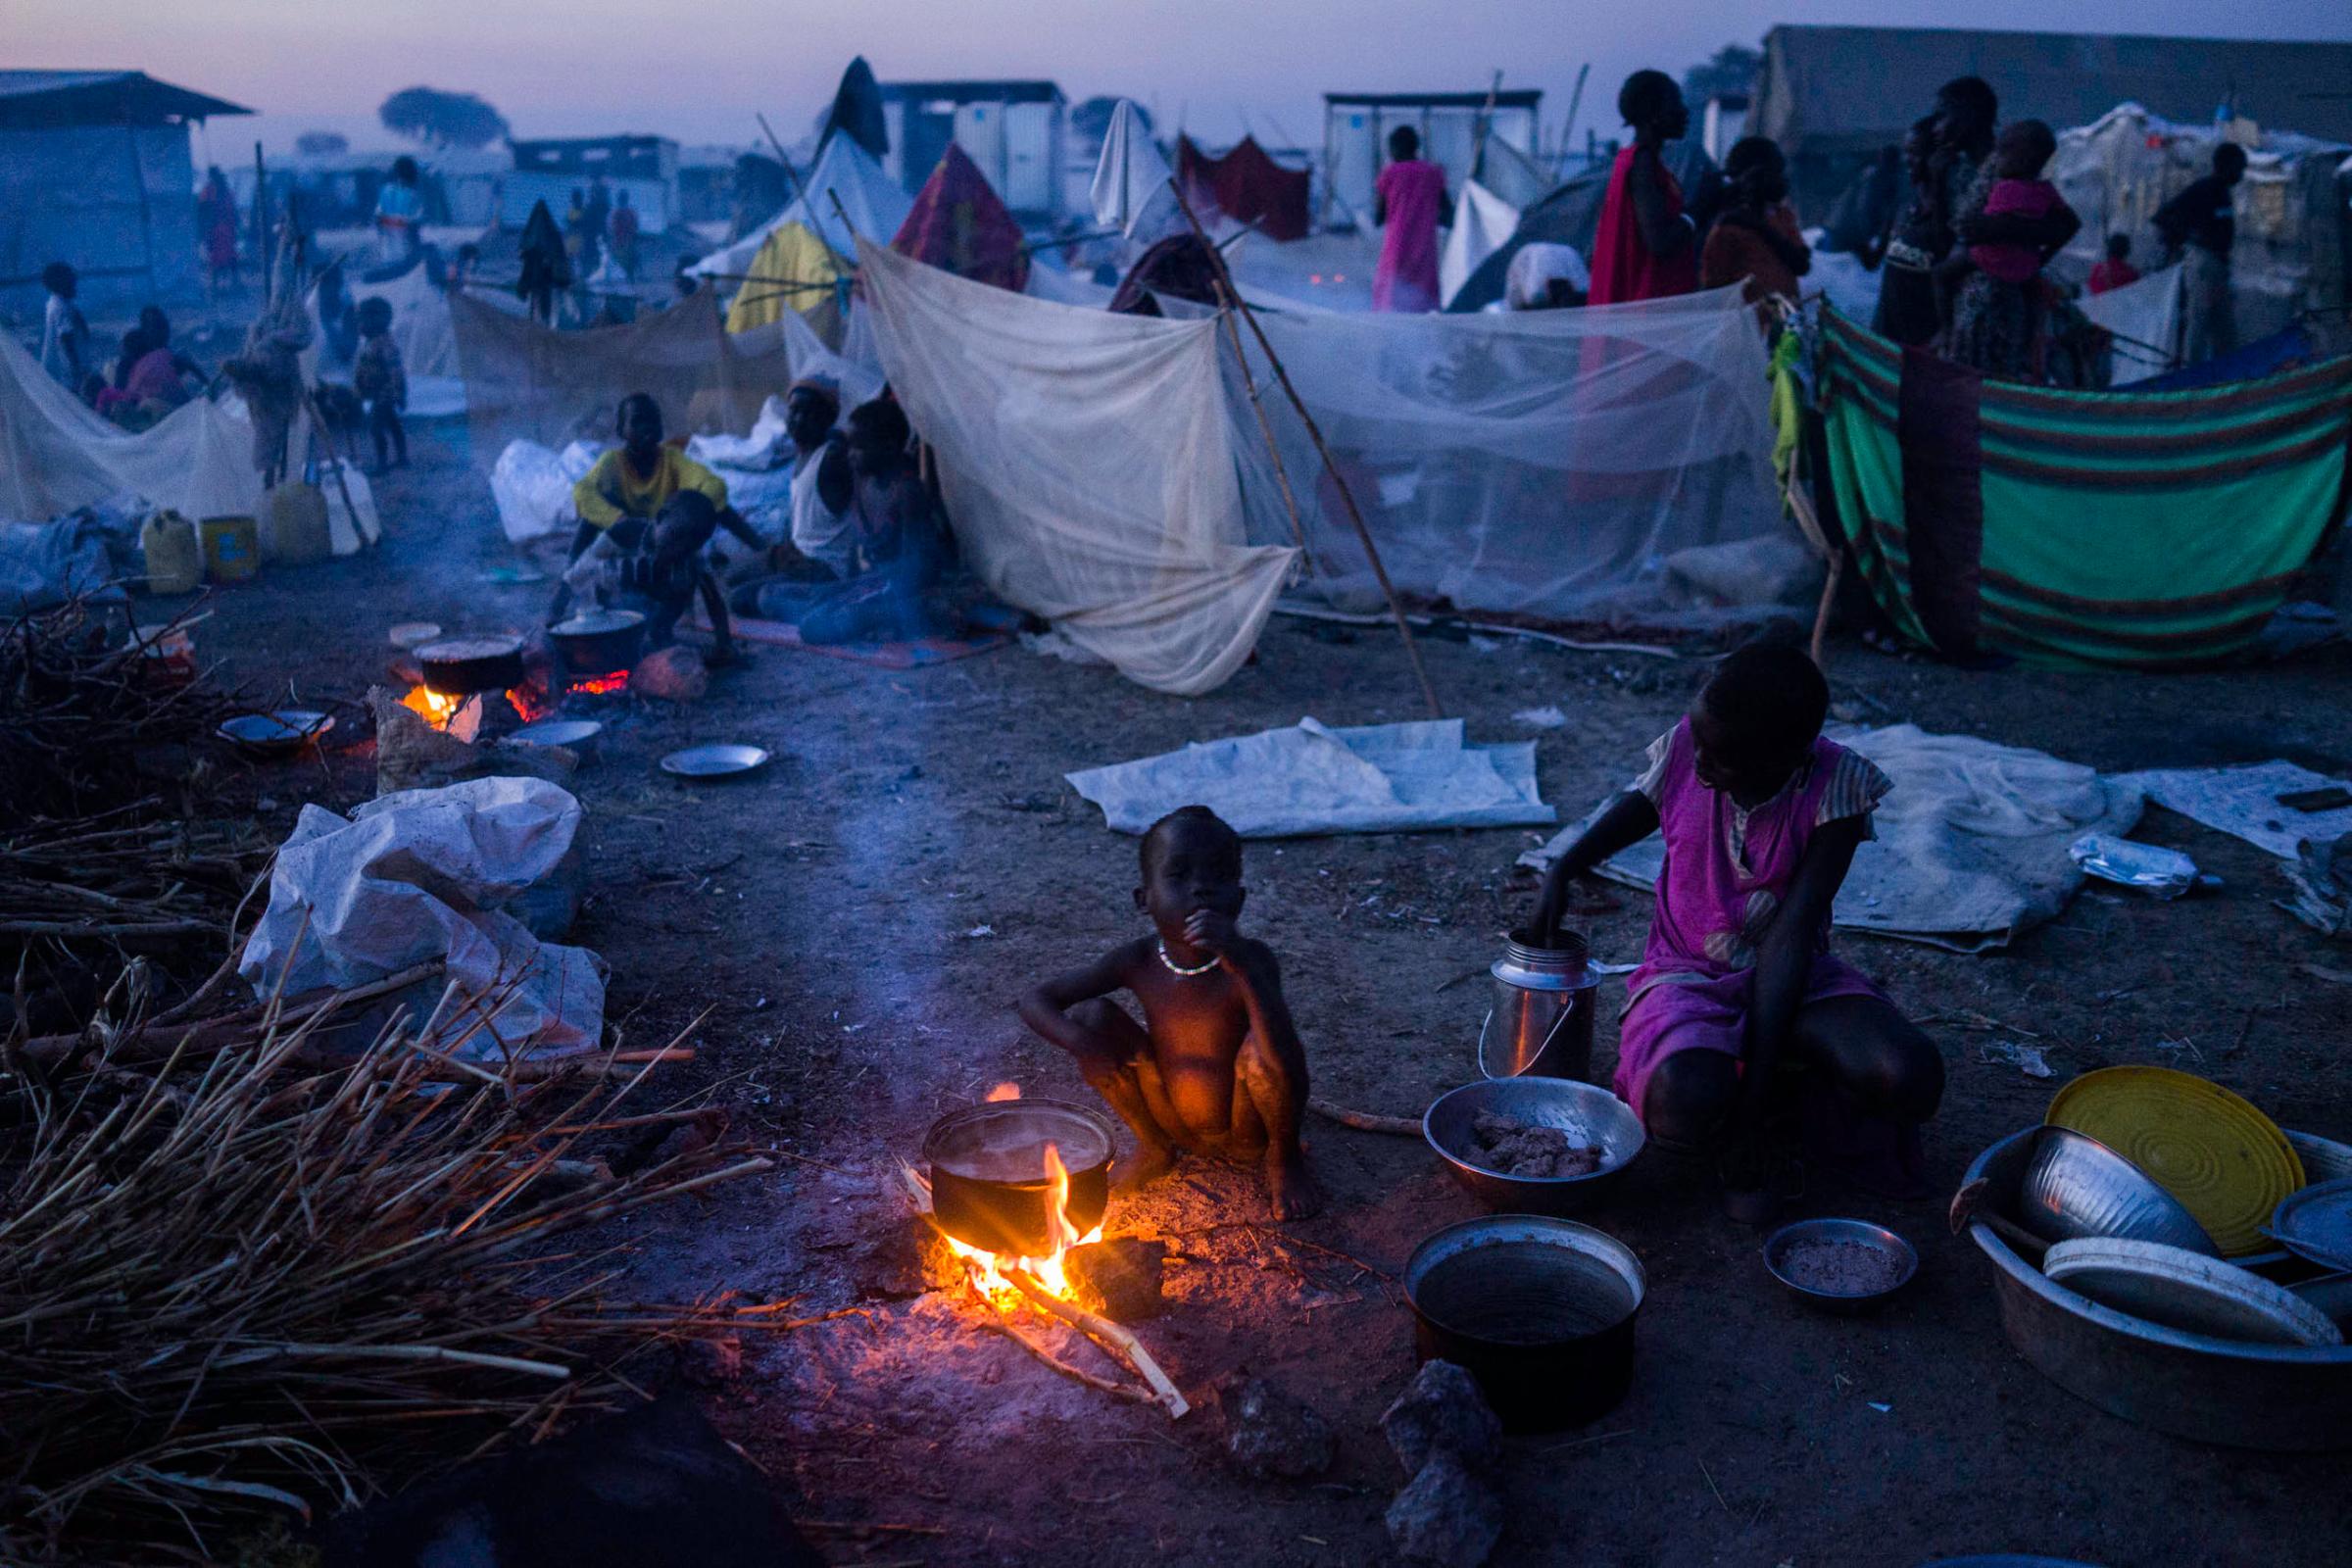 A mother prepares food for her child at a United Nations camp, where more than 100,00 displaced people seek security and food, in Bentiu, People walk past a drainage ditch in the United Nations camp in Bentiu, Unity State, South Sudan.